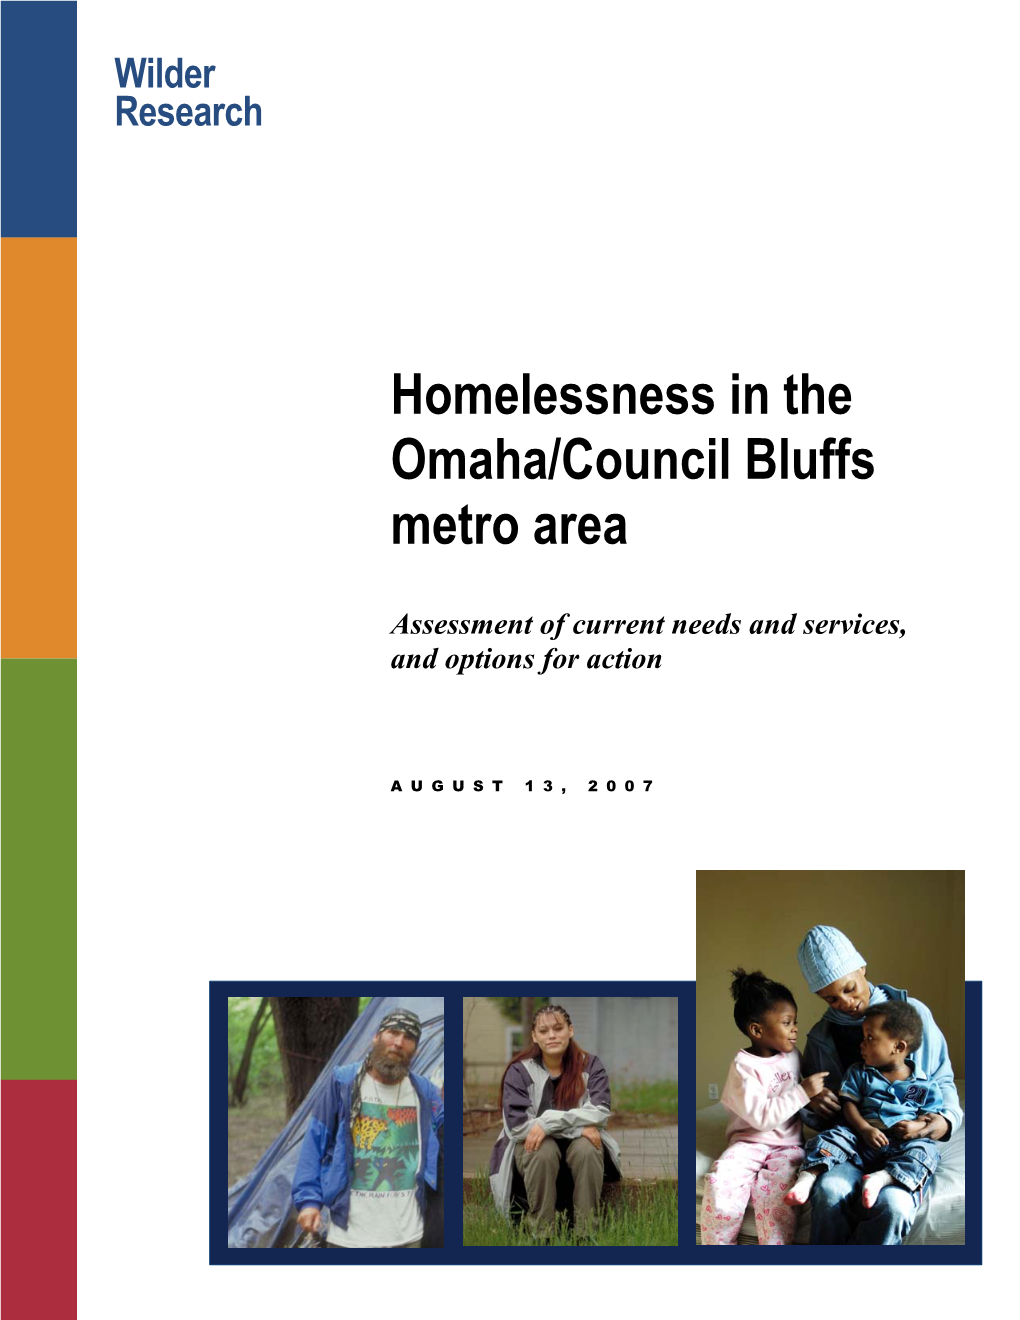 Homelessness in the Omaha/Council Bluffs Metro Area